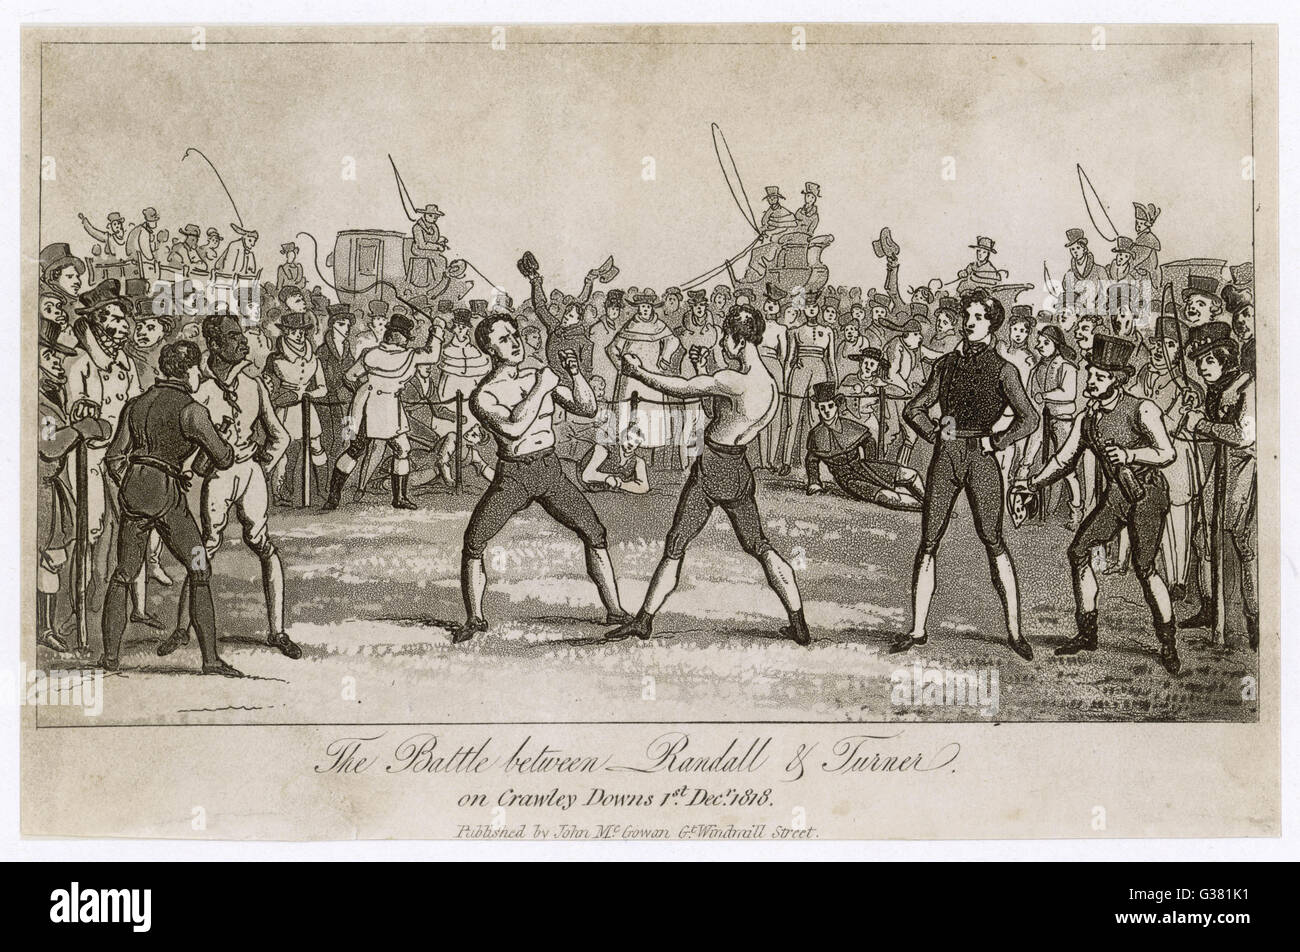 The battle between Randall and  Turner on Crawley Downs         Date: 1 December 1818 Stock Photo